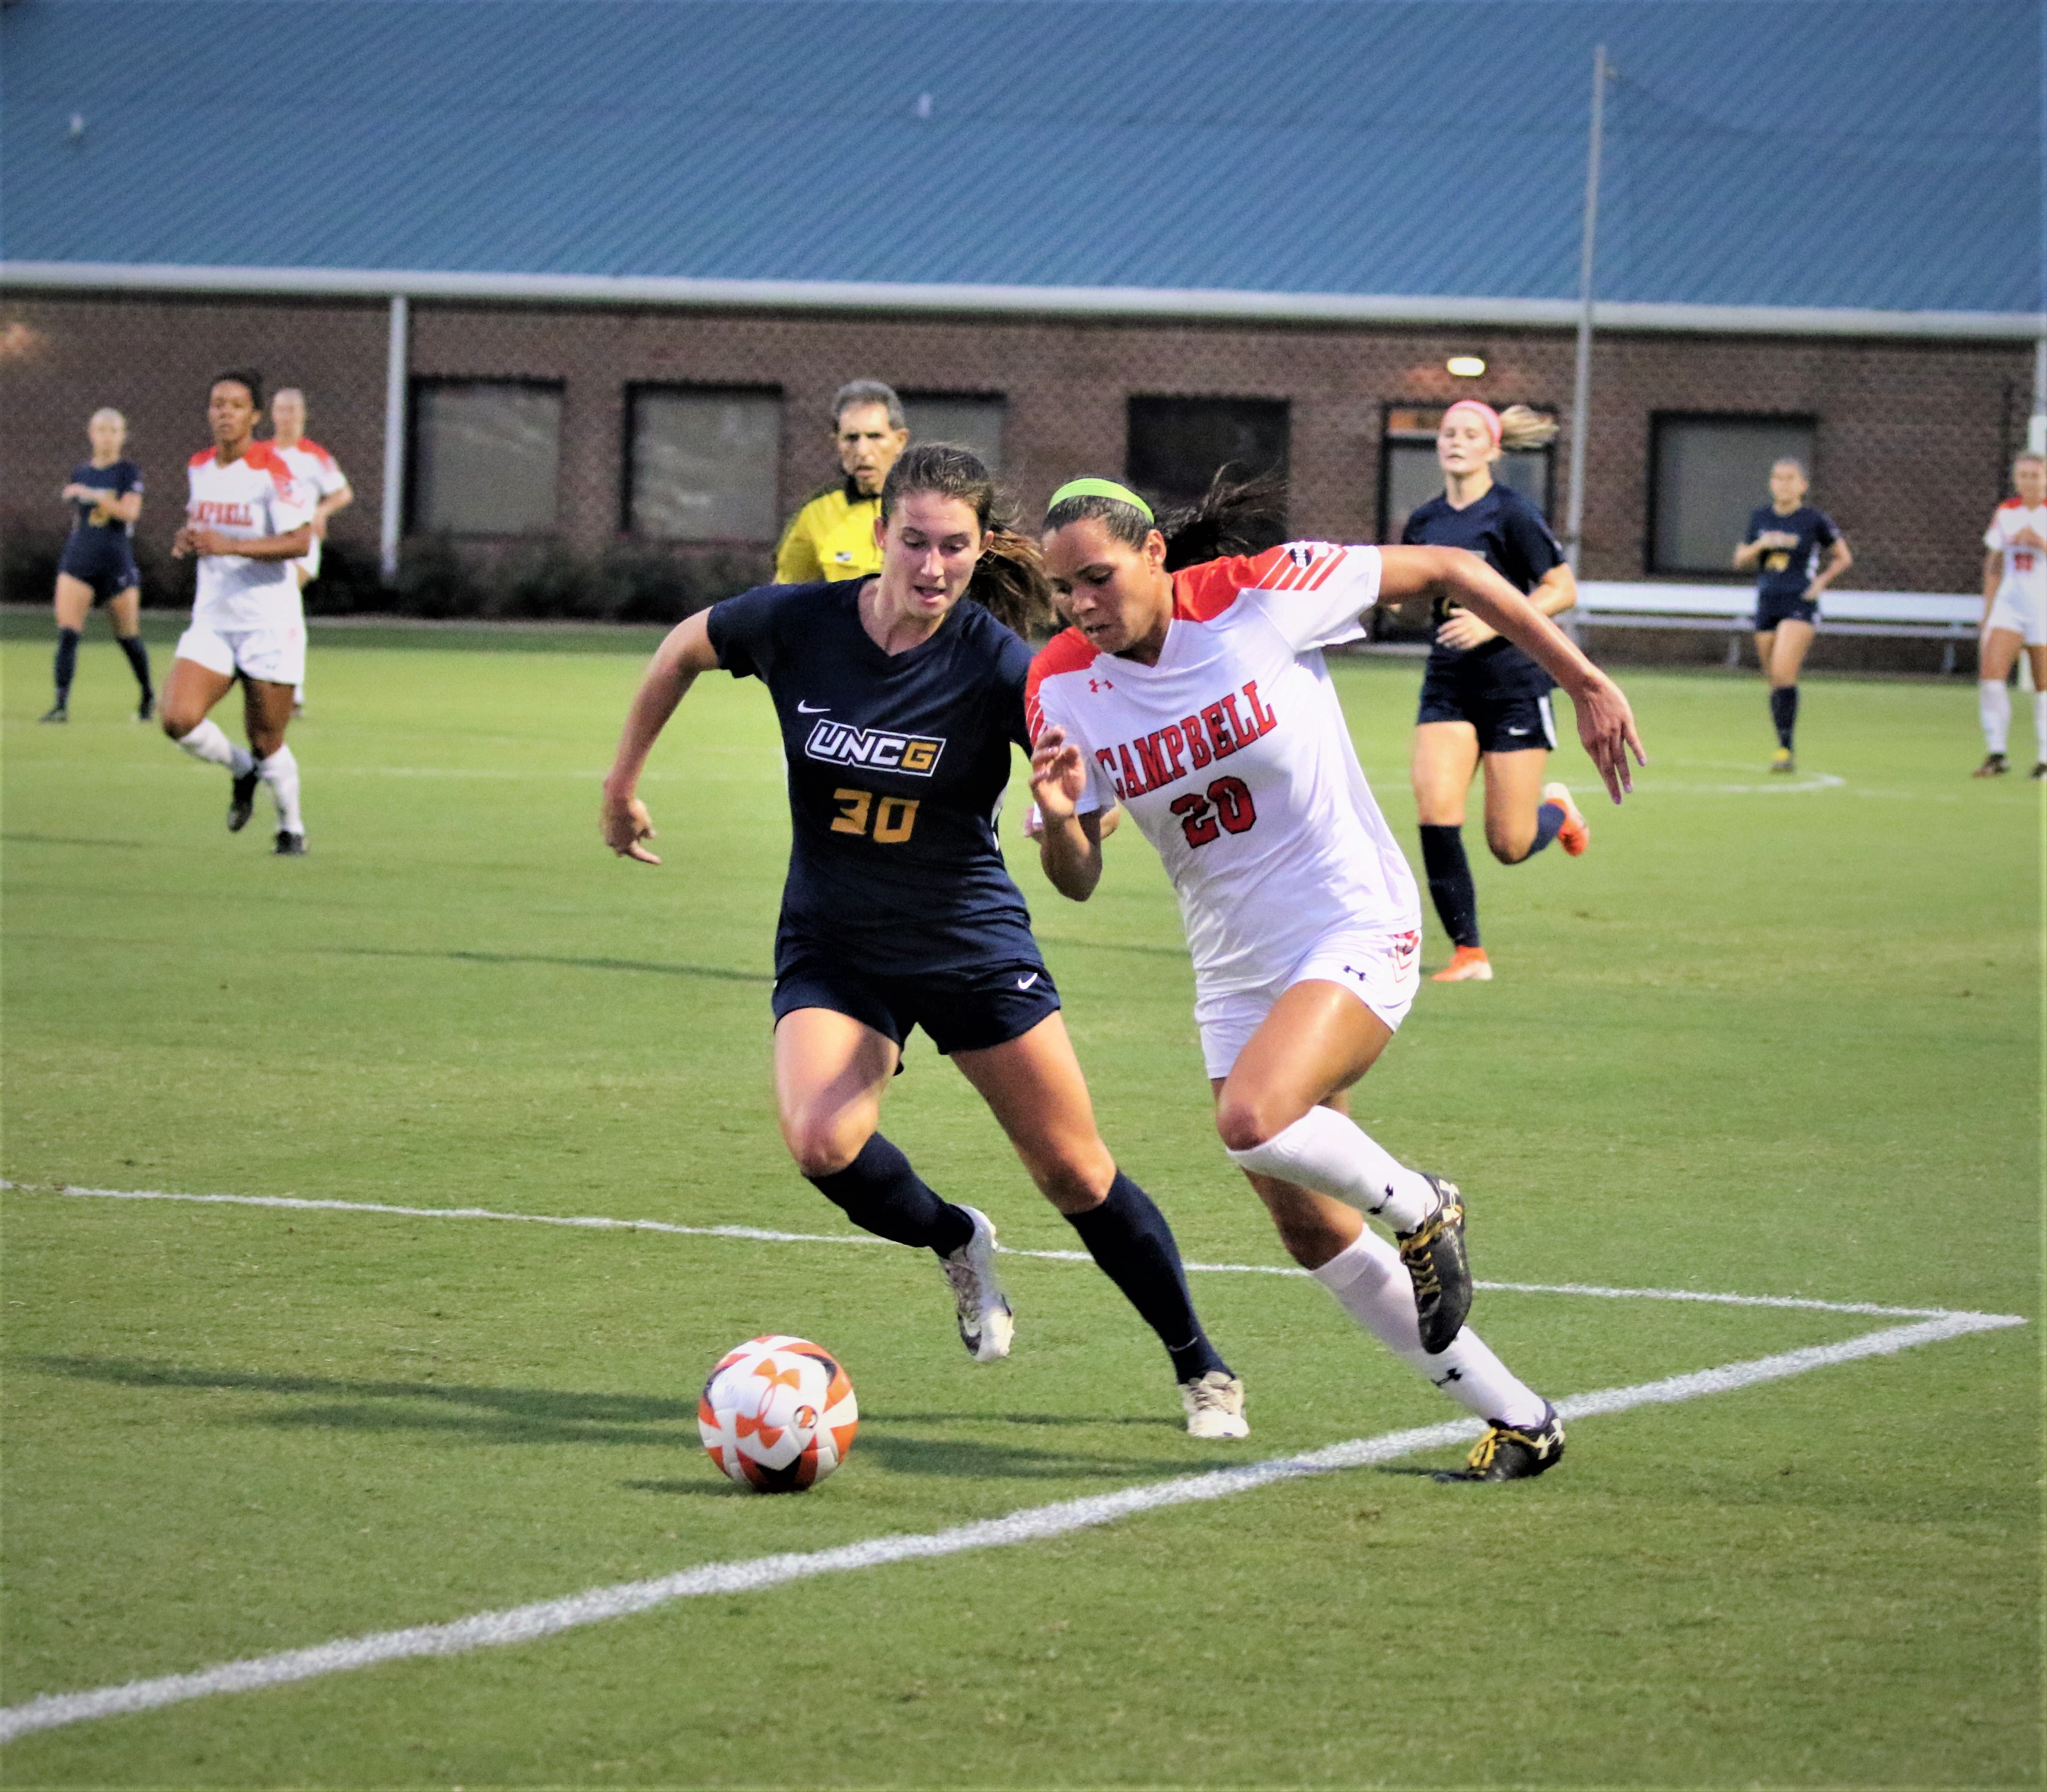 Campbell draws with UNCG in women’s soccer